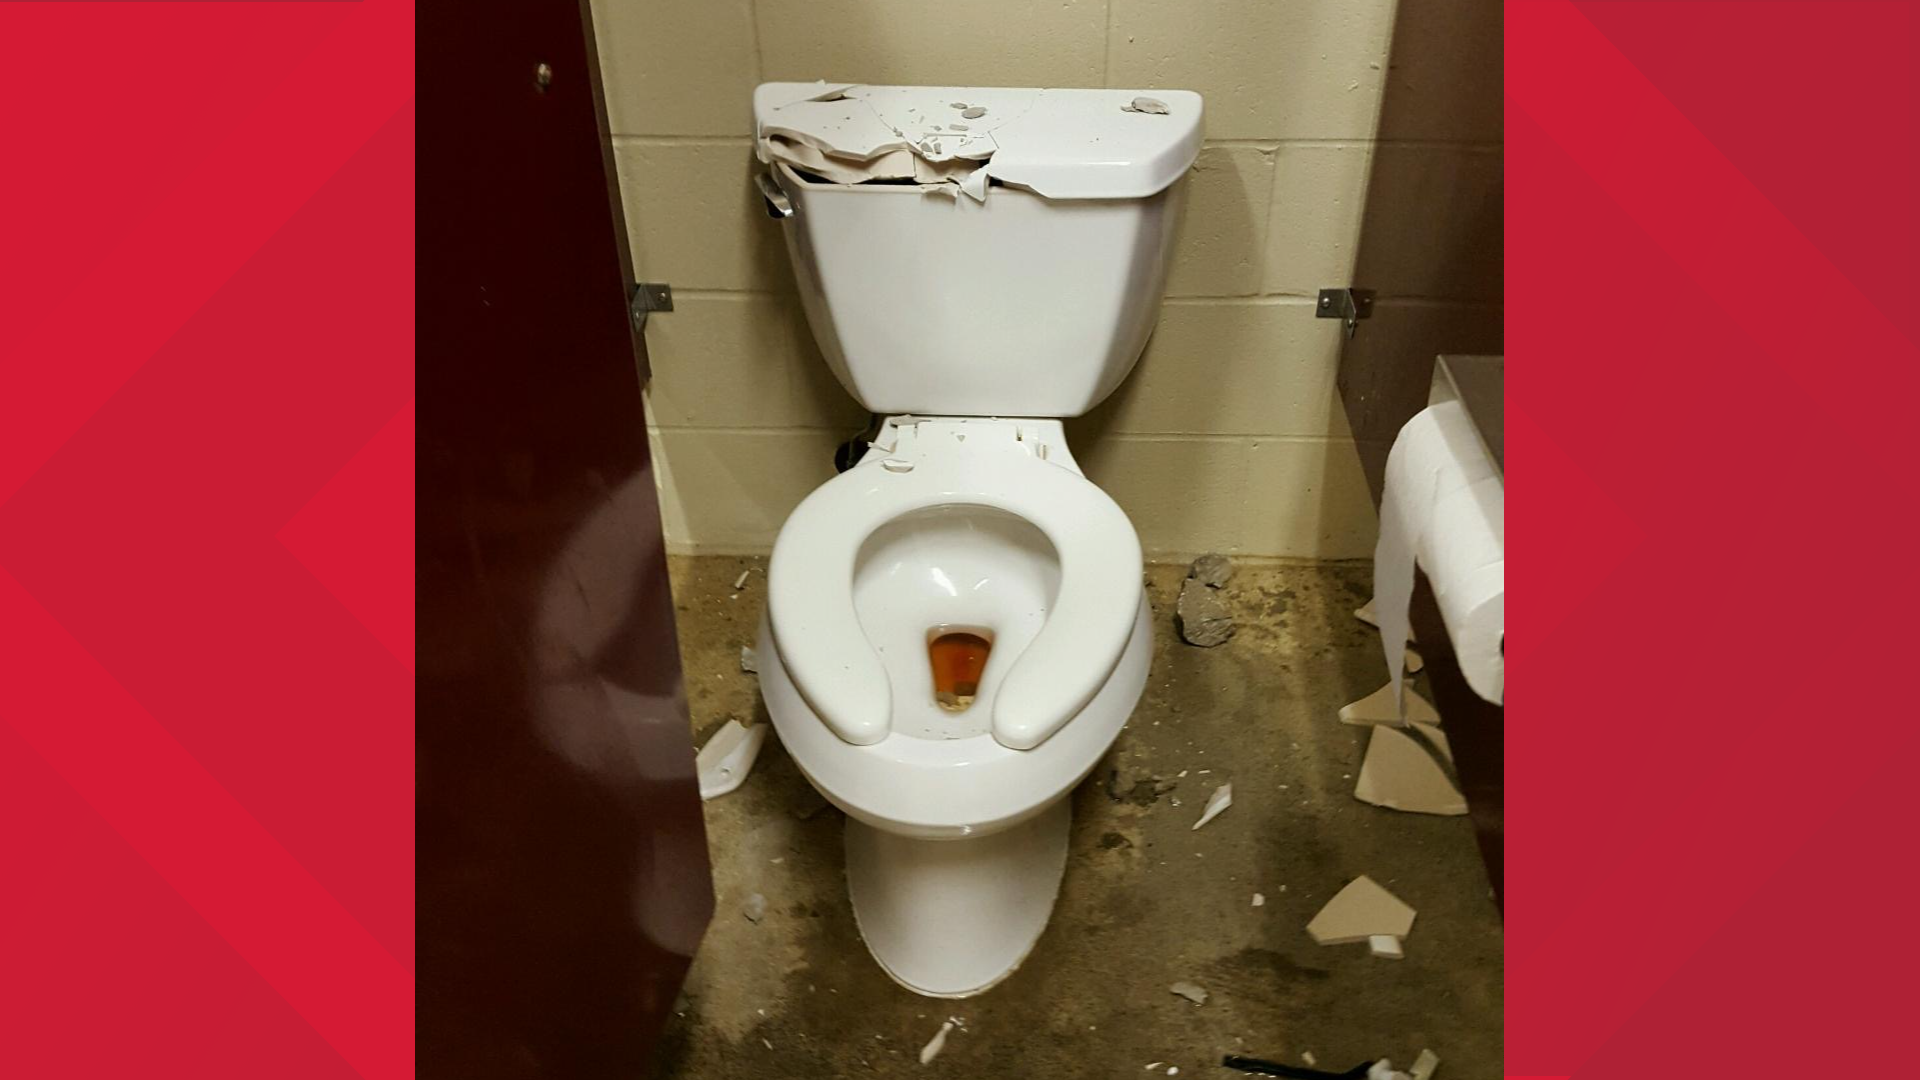 Teens vandalizing bathrooms as part of a TikTok challenge have cost the Speedway Parks Department thousands of dollars in just the last week alone.